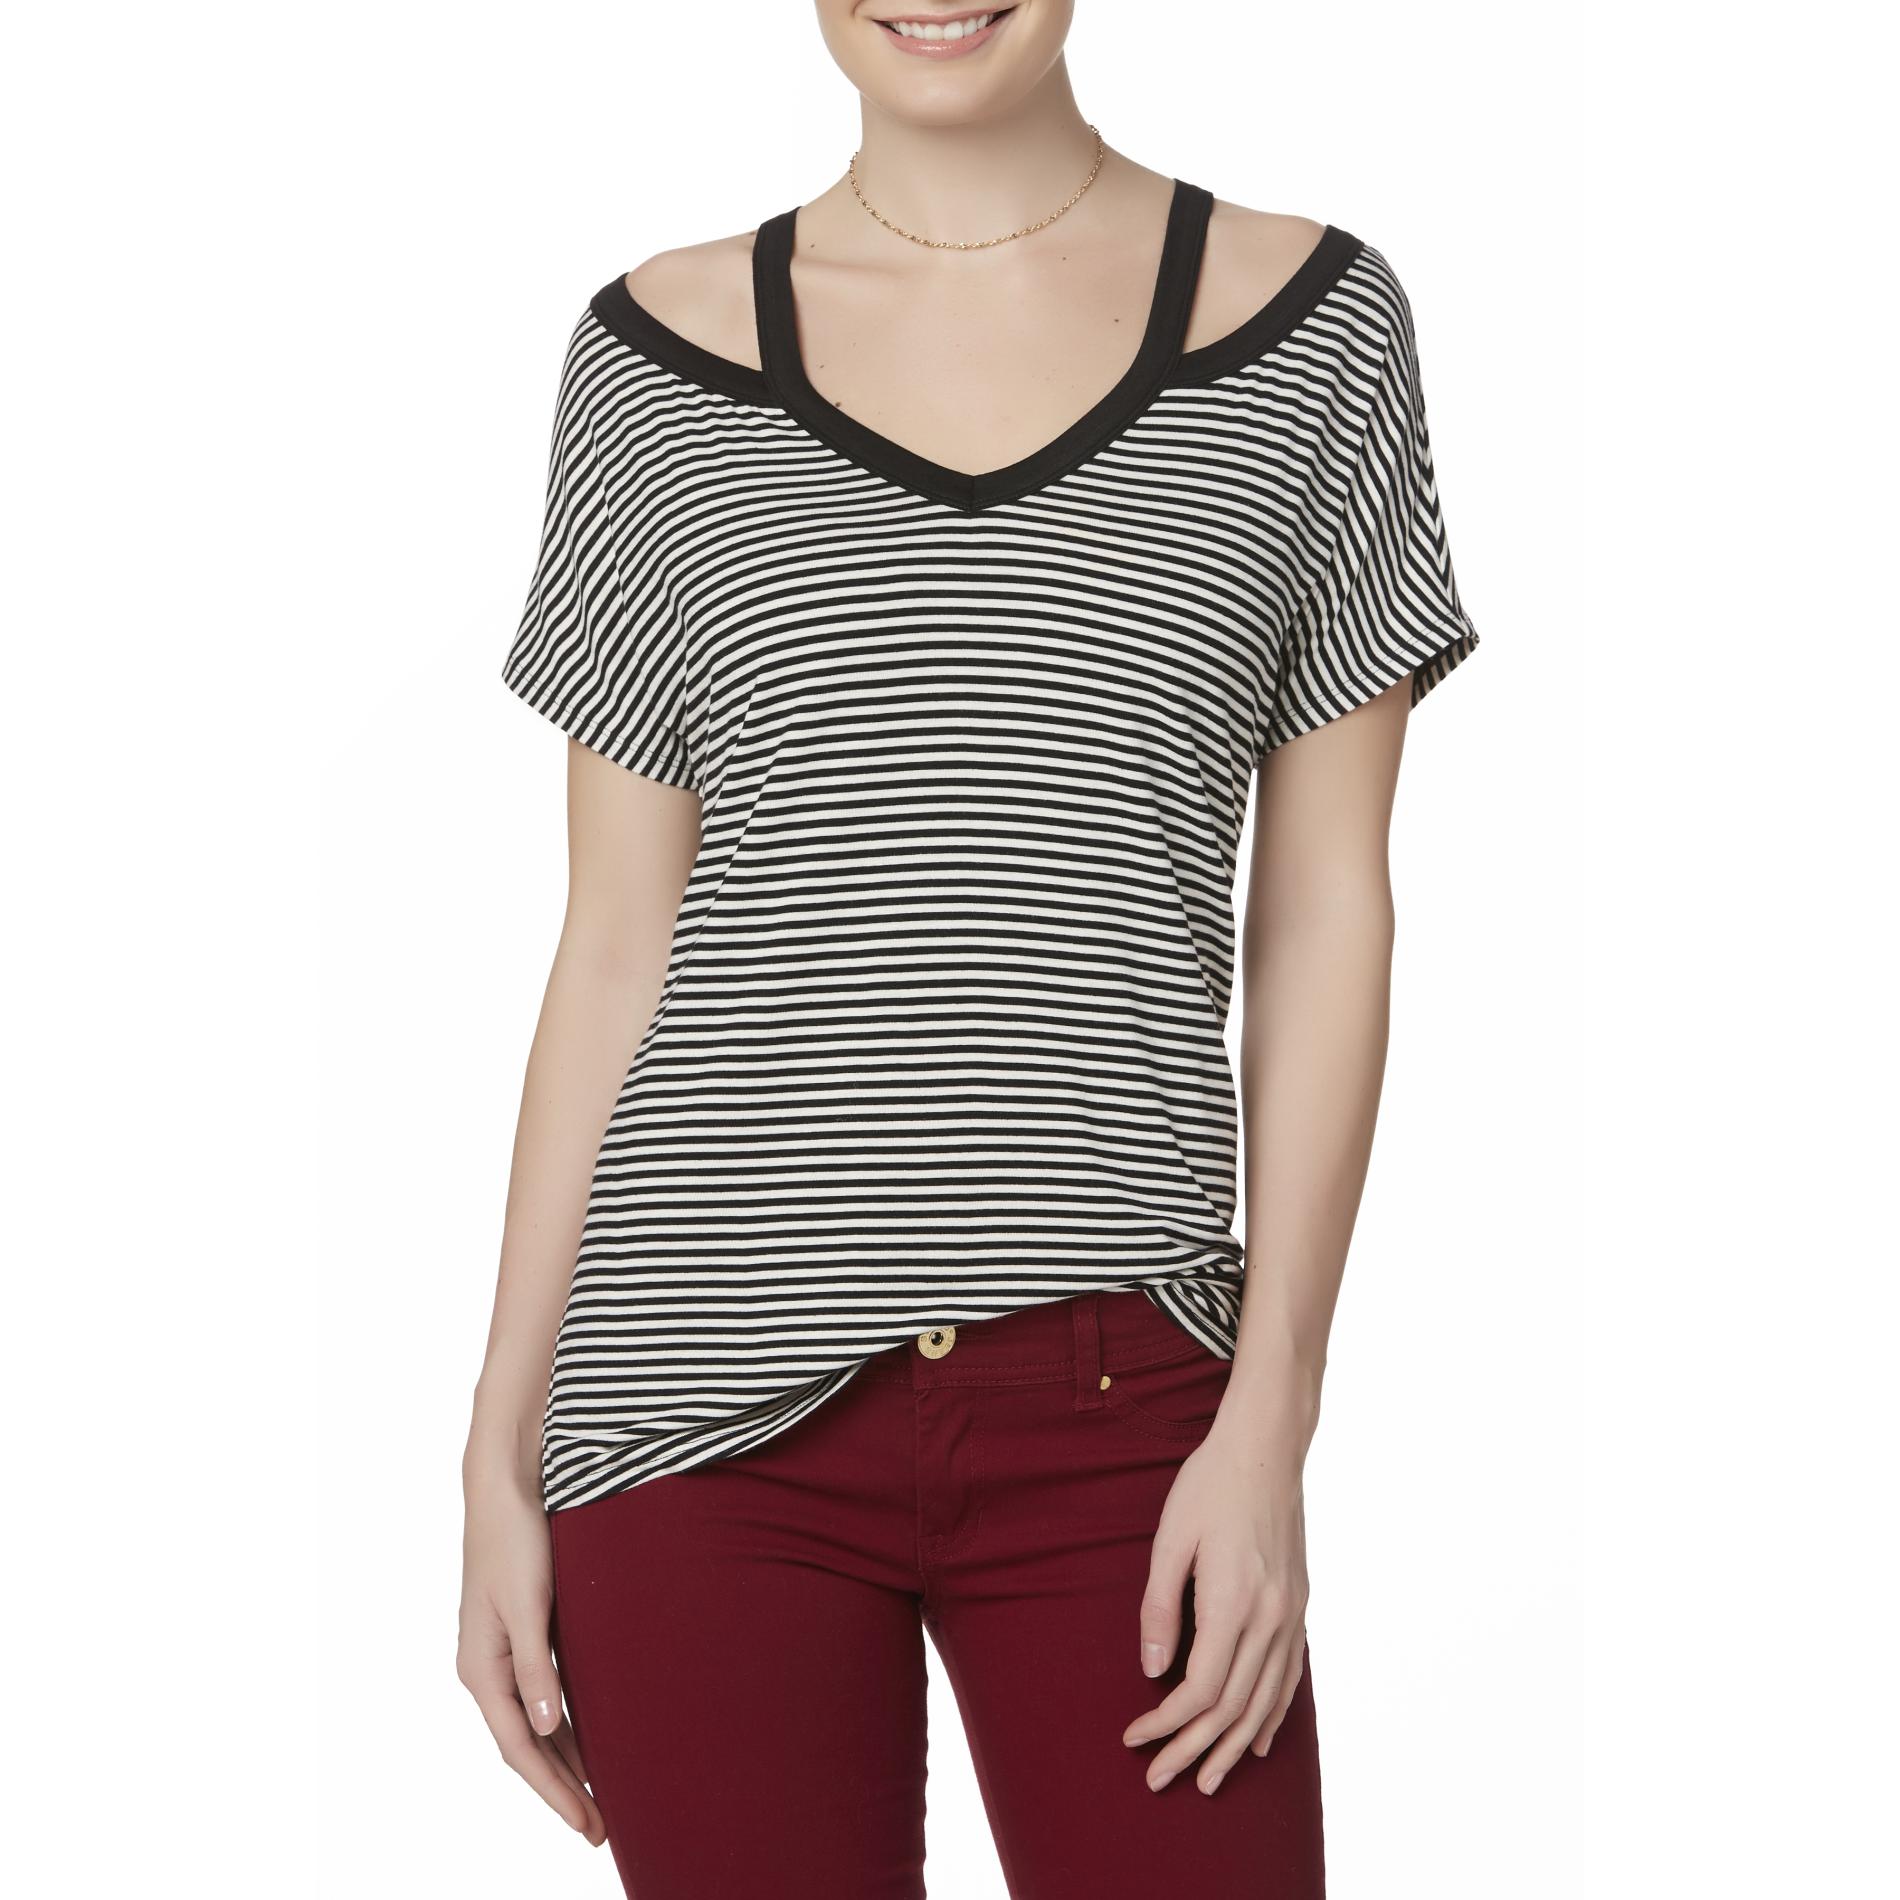 Simply Styled Women's Cutout T-Shirt - Striped